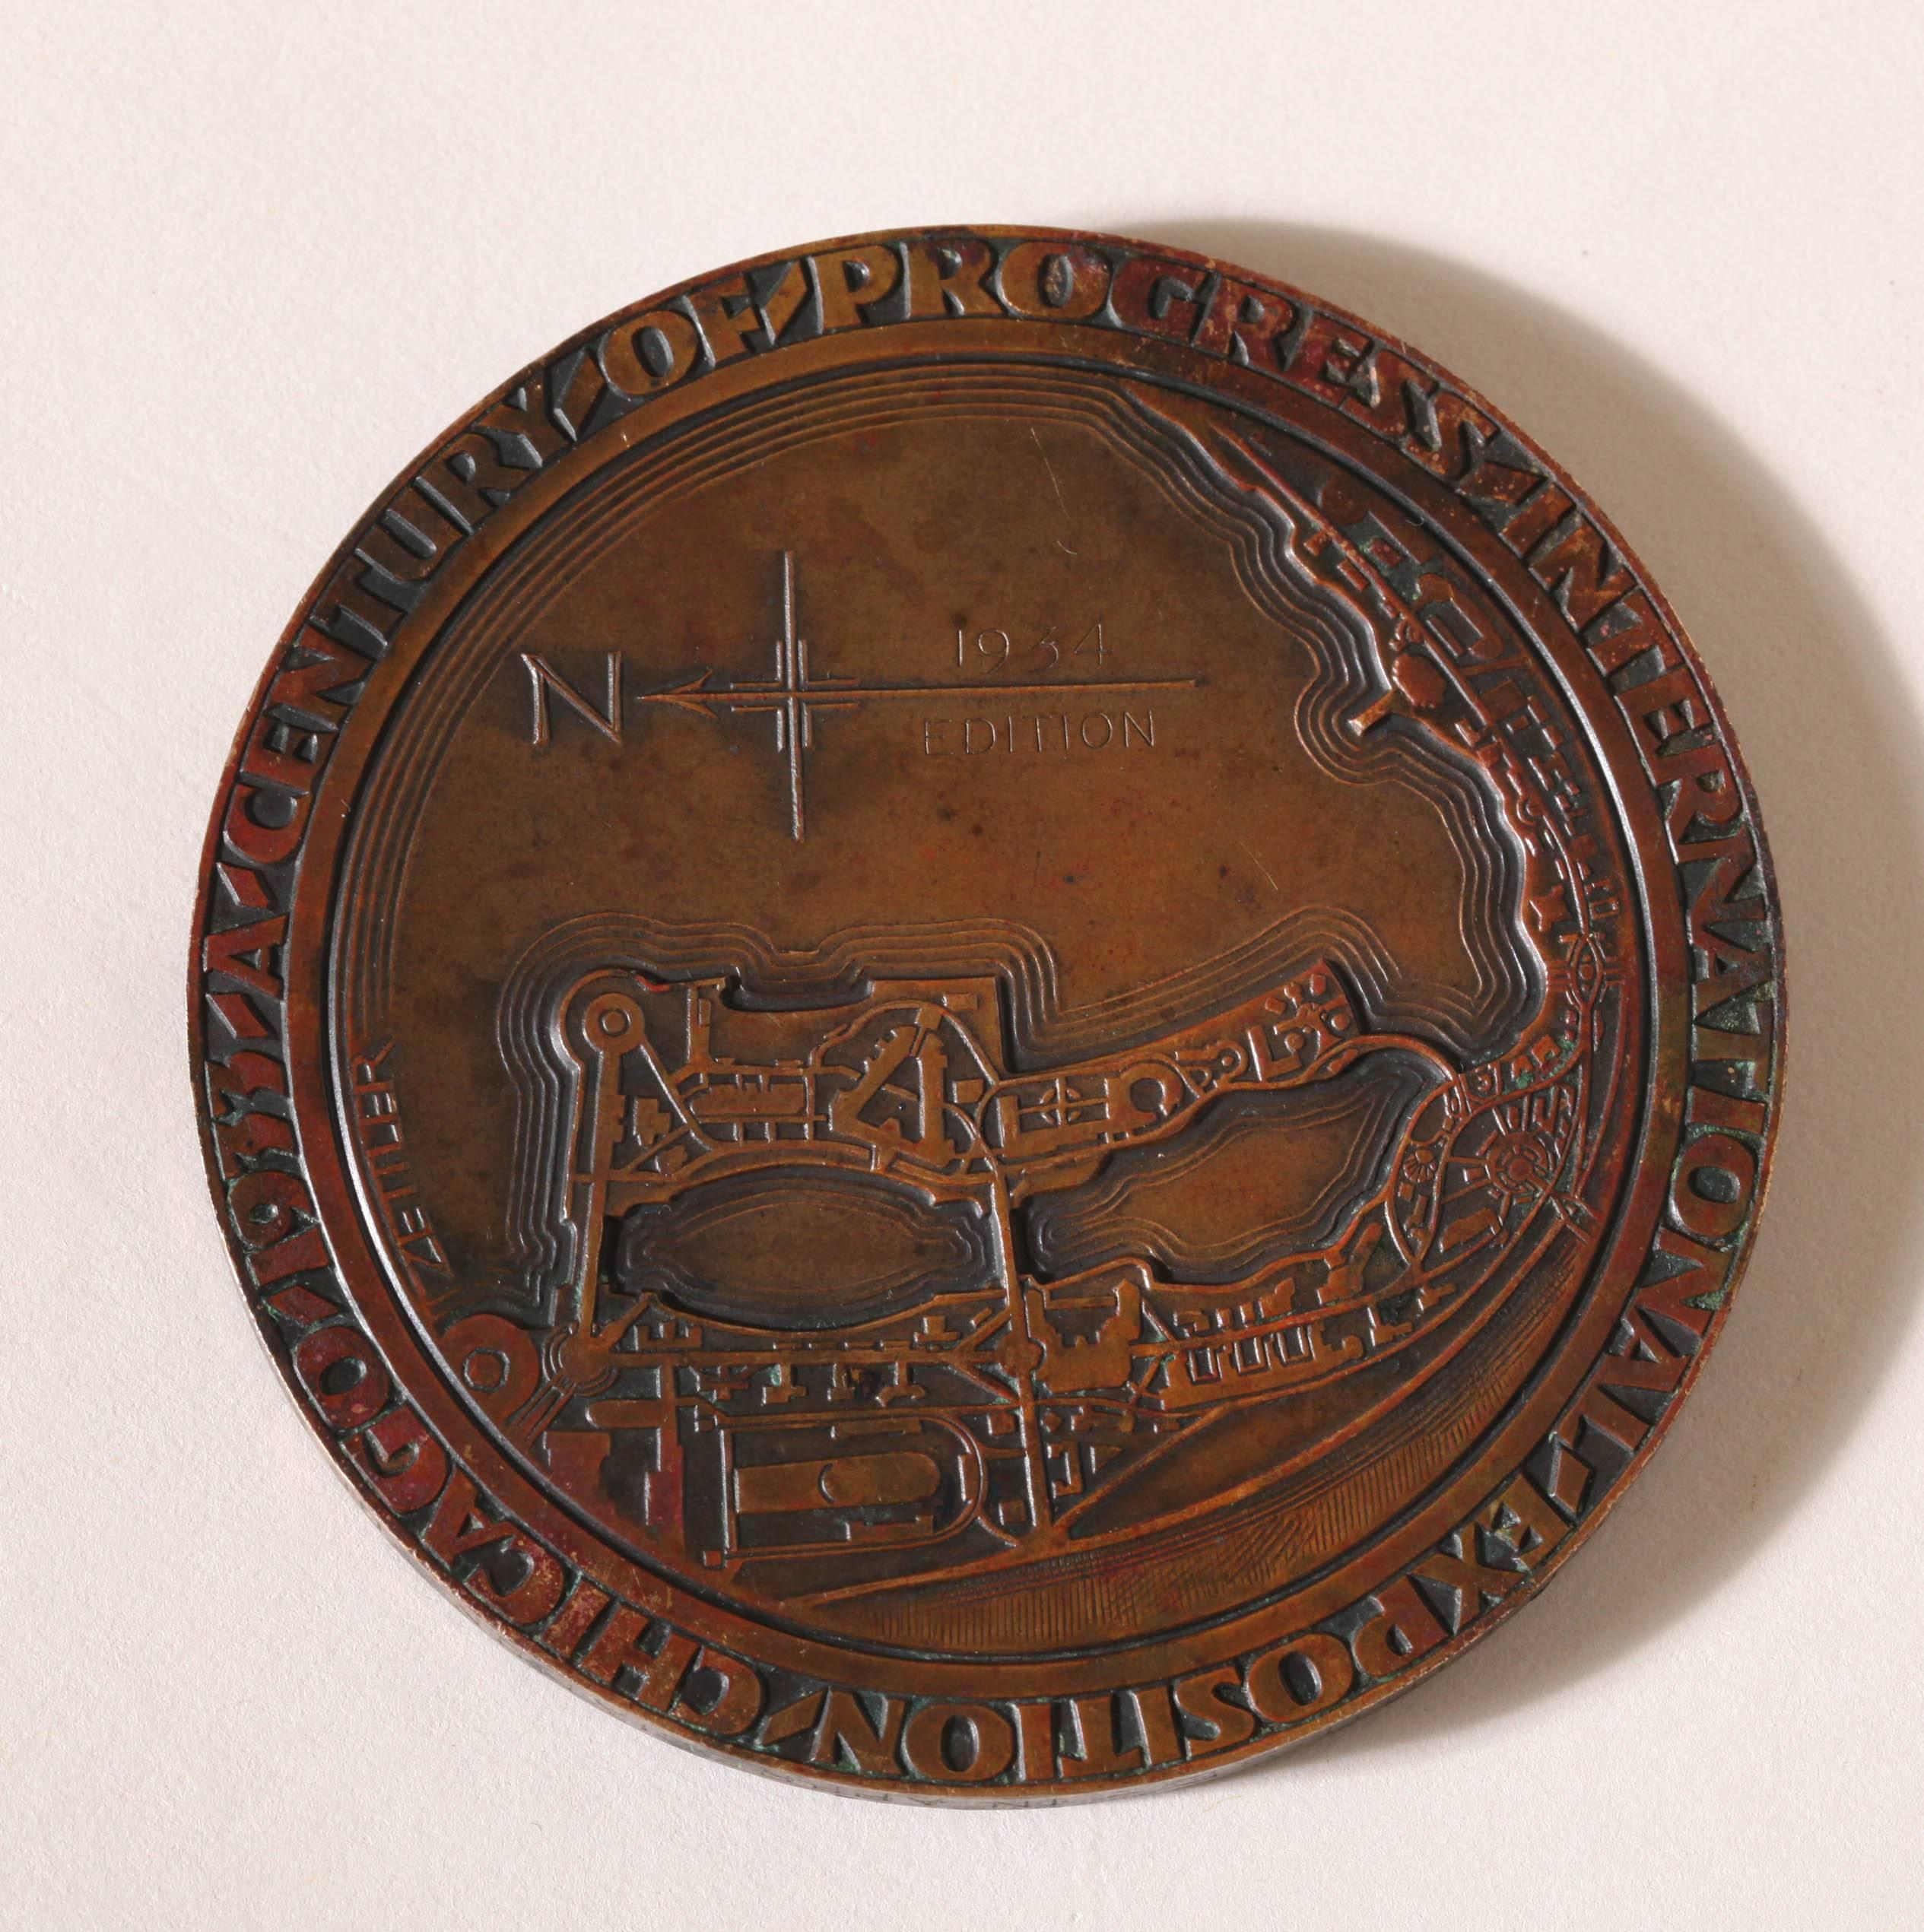 American Art Deco Bronze Medal in High Relief commemorating the Century of Progress International Exposition Chicago

With the symbolism of the  exposition on the obverse and a map of the exposition on the reverse.

Signed ERZ on obverse and